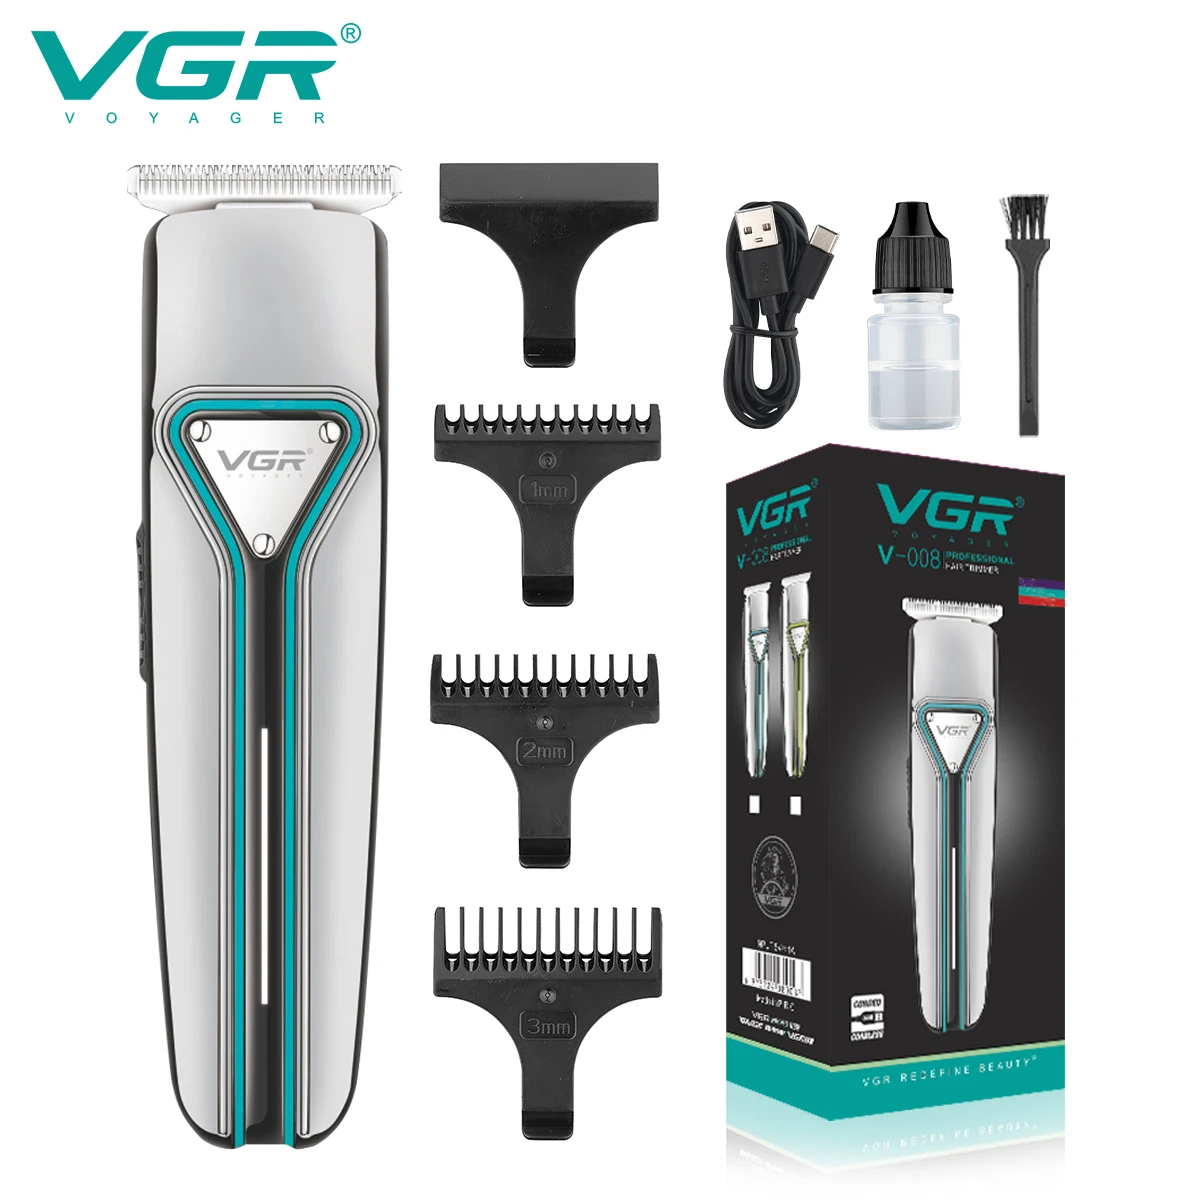 VGR Hair Clipper Cordless Hair Cutting Machine Professional Barber Electric Beard Trimmer Rechargeable Trimmer for Men V-008